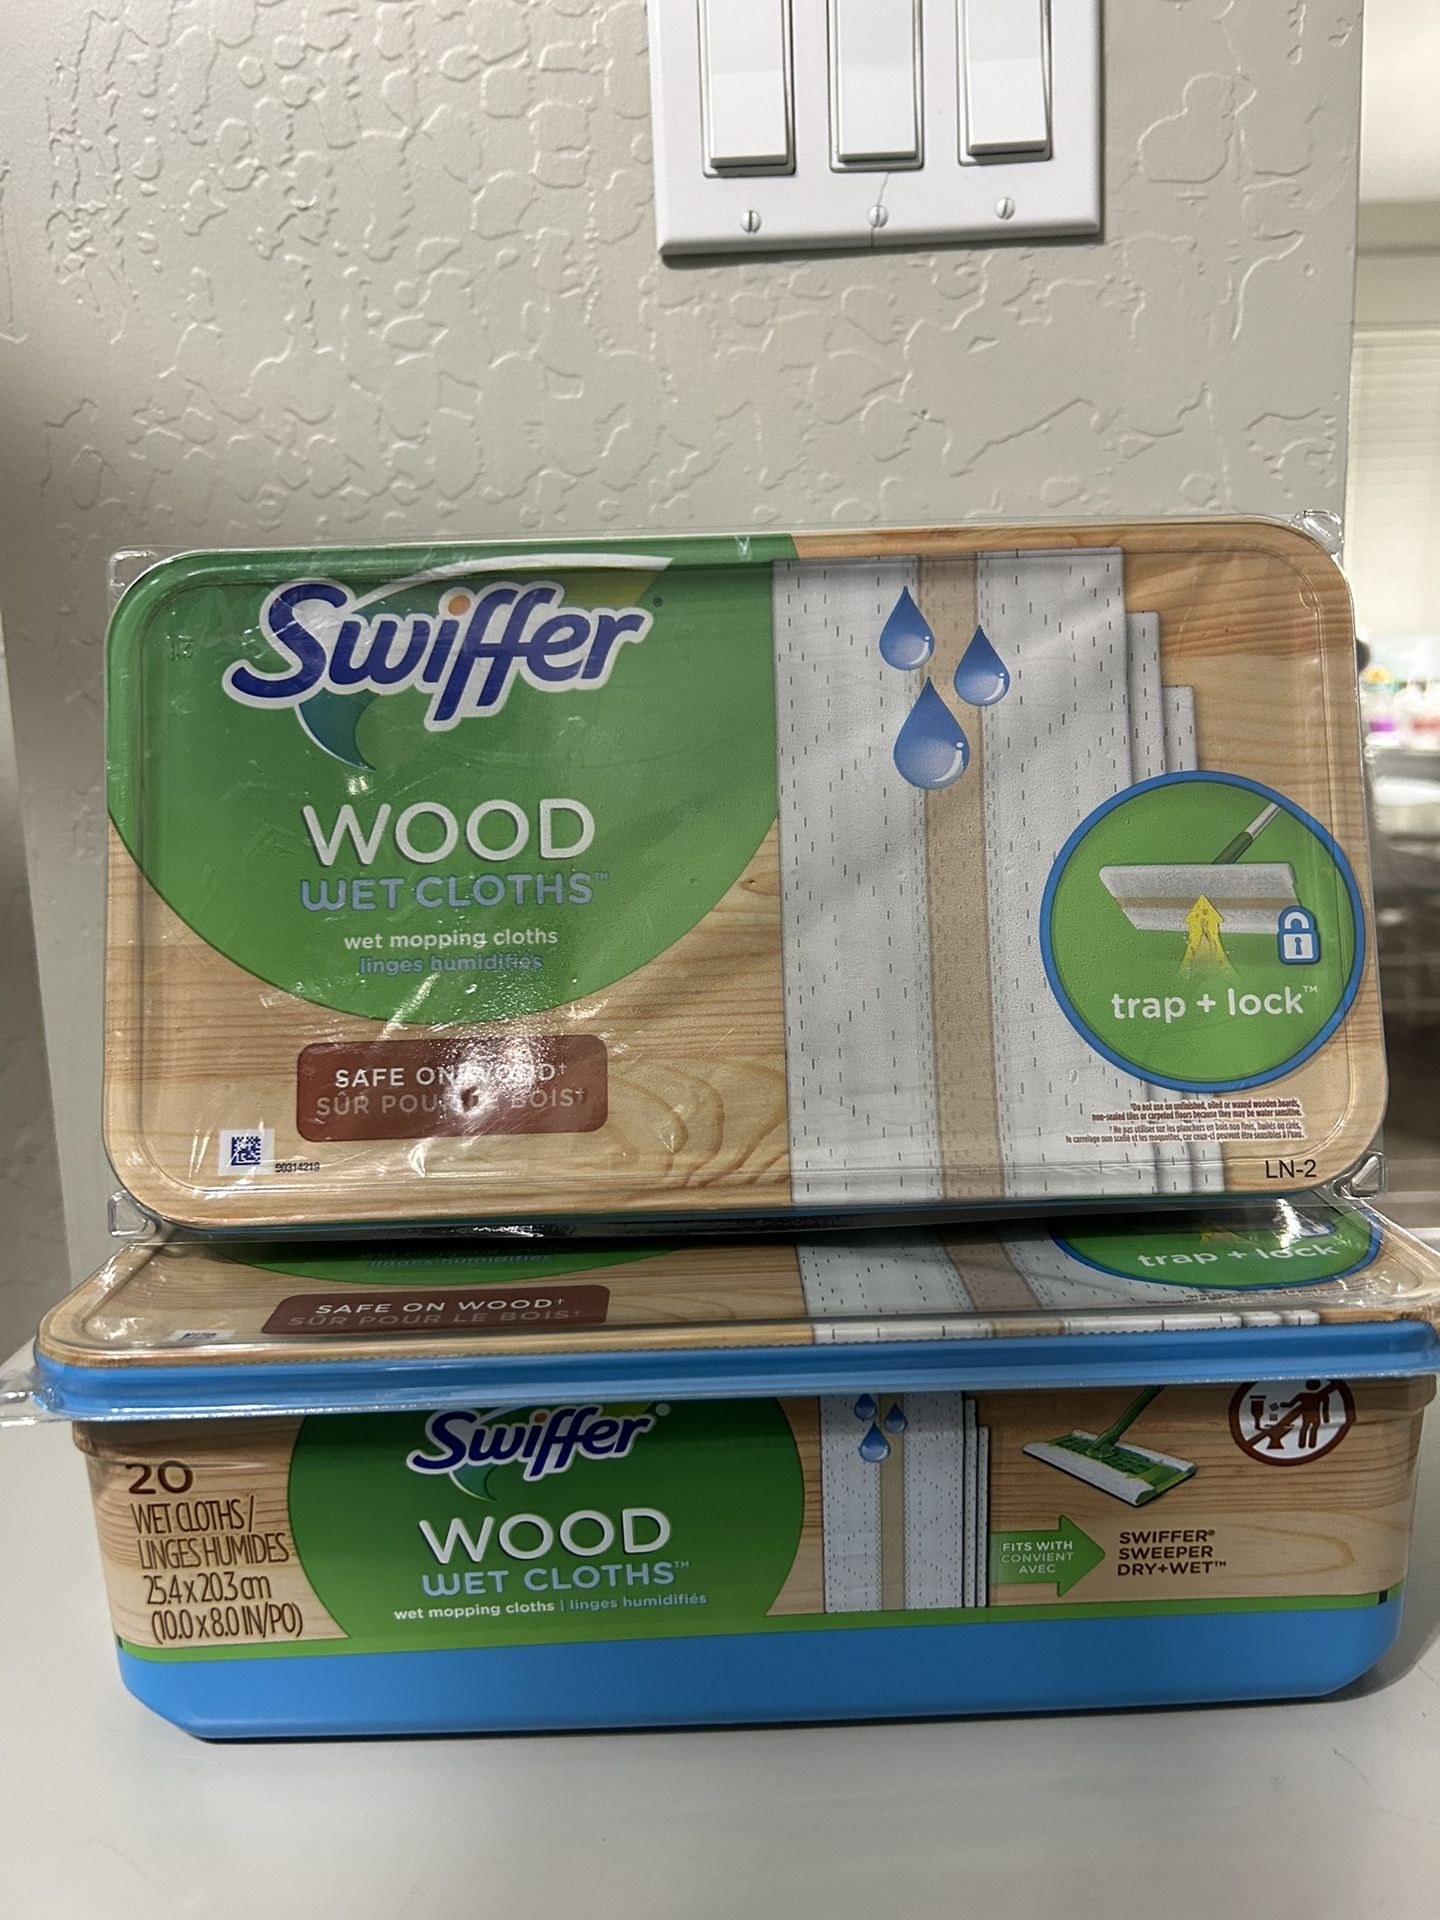 SWIFFER WOOD WET CLOTHS 2 FOR $14.00 